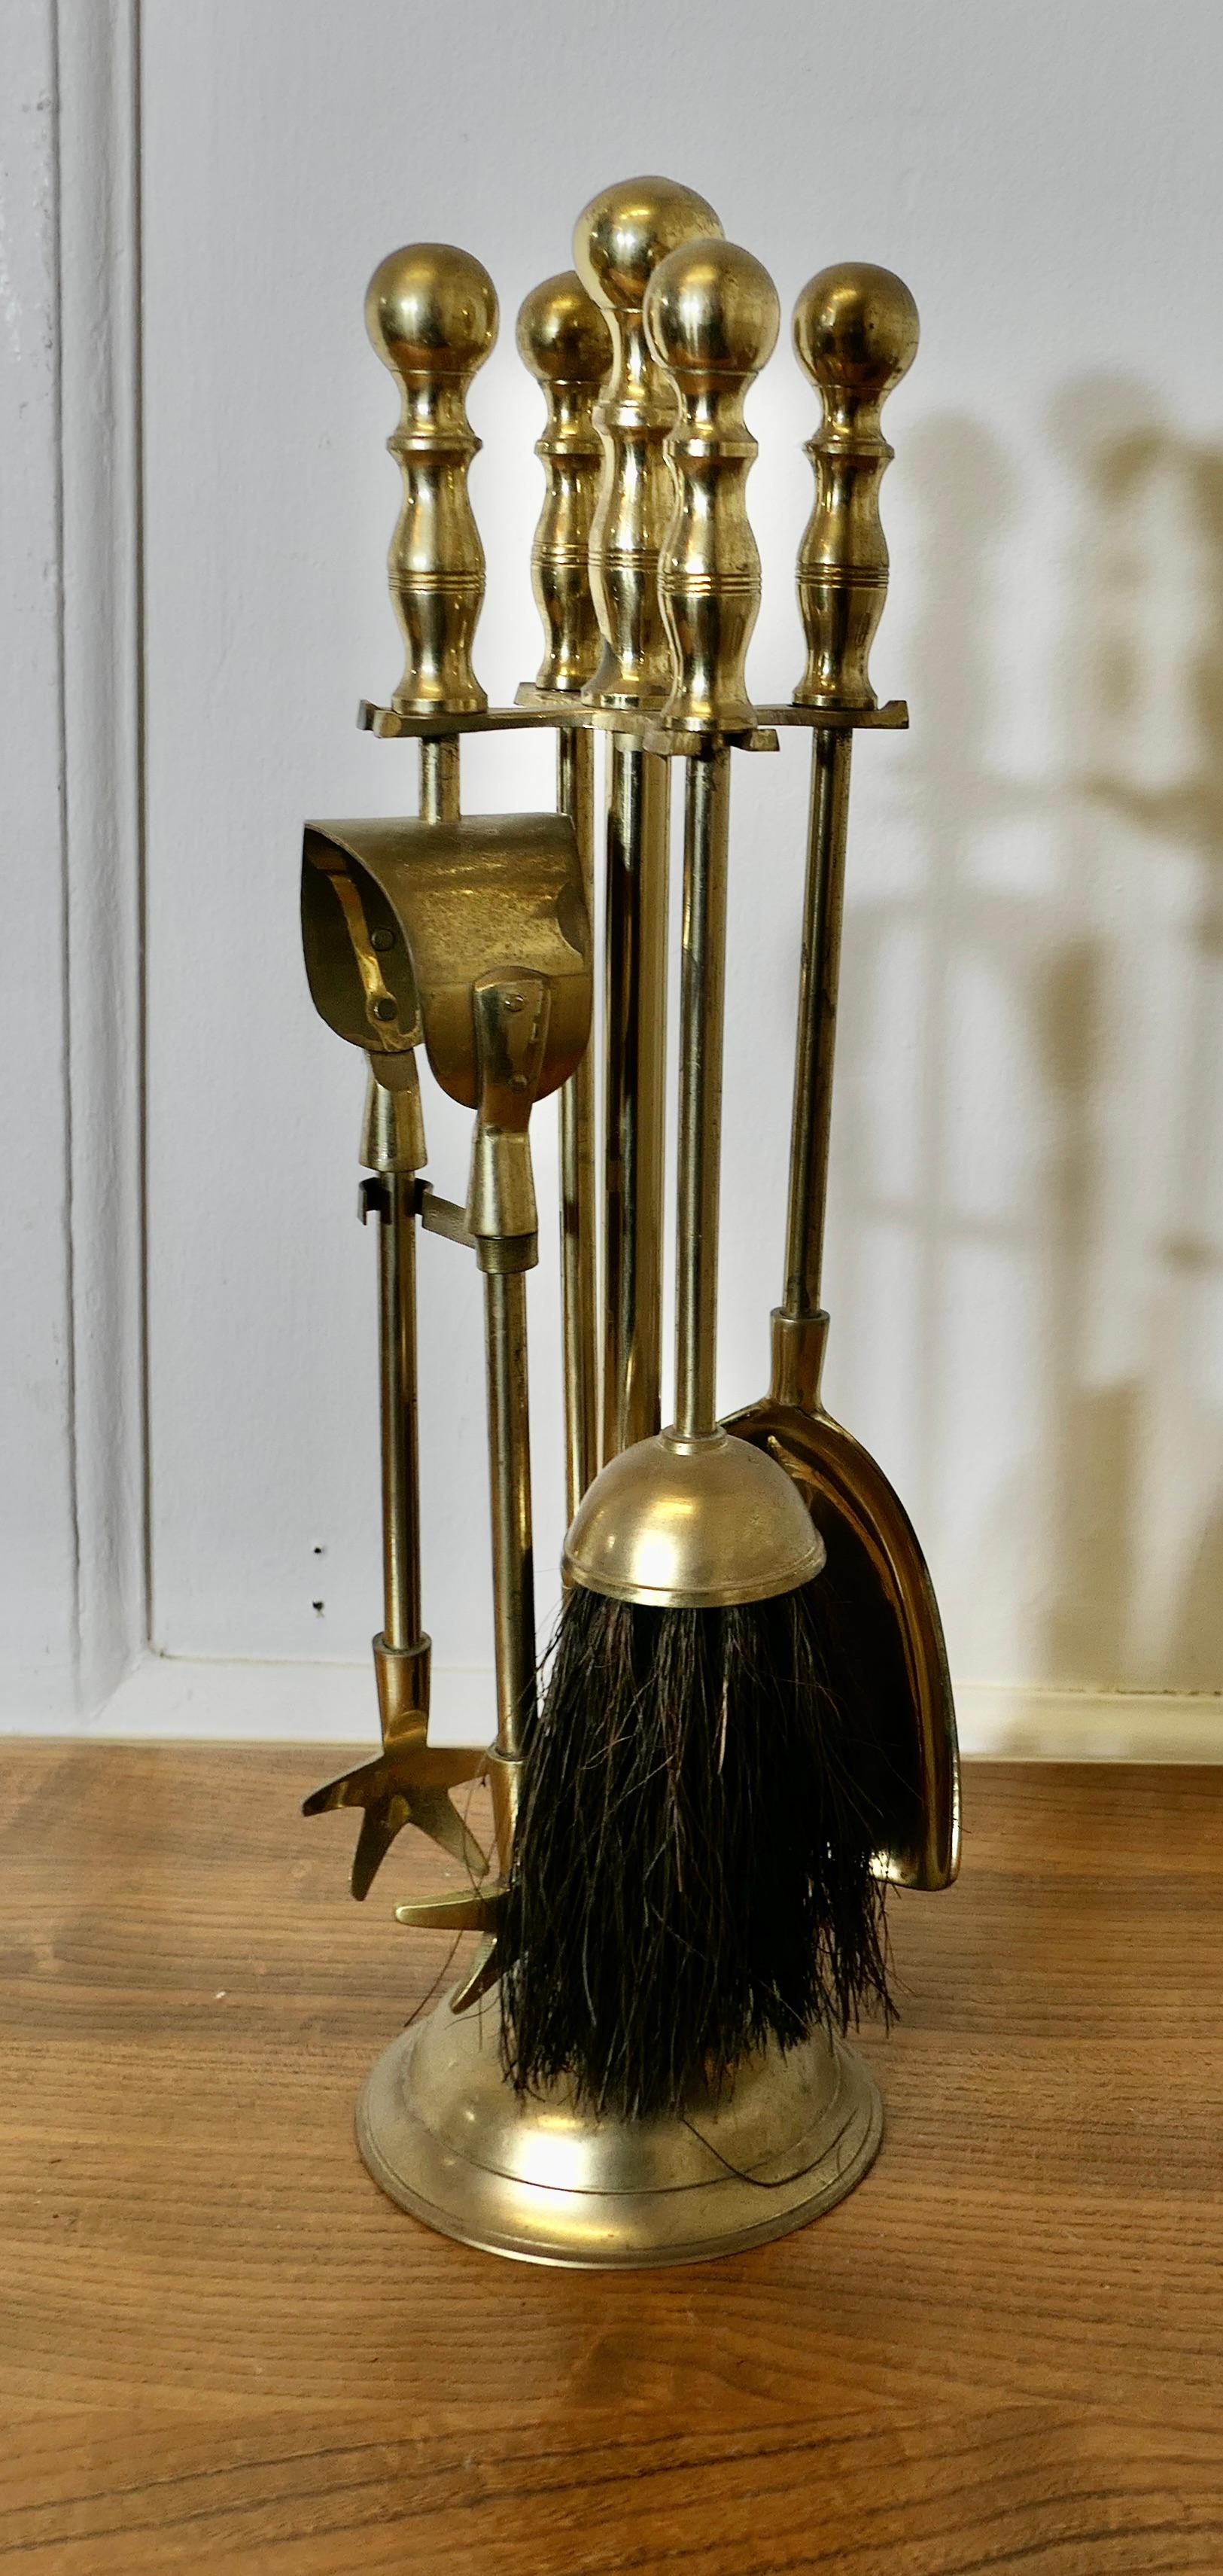 Attractive Brass Fireside Companion Set, Fireside Tools

This is a very attractive set on its own stand, shovel, tongs, brush and poker  
The stand 16” tall and 4” in diameter
FB133